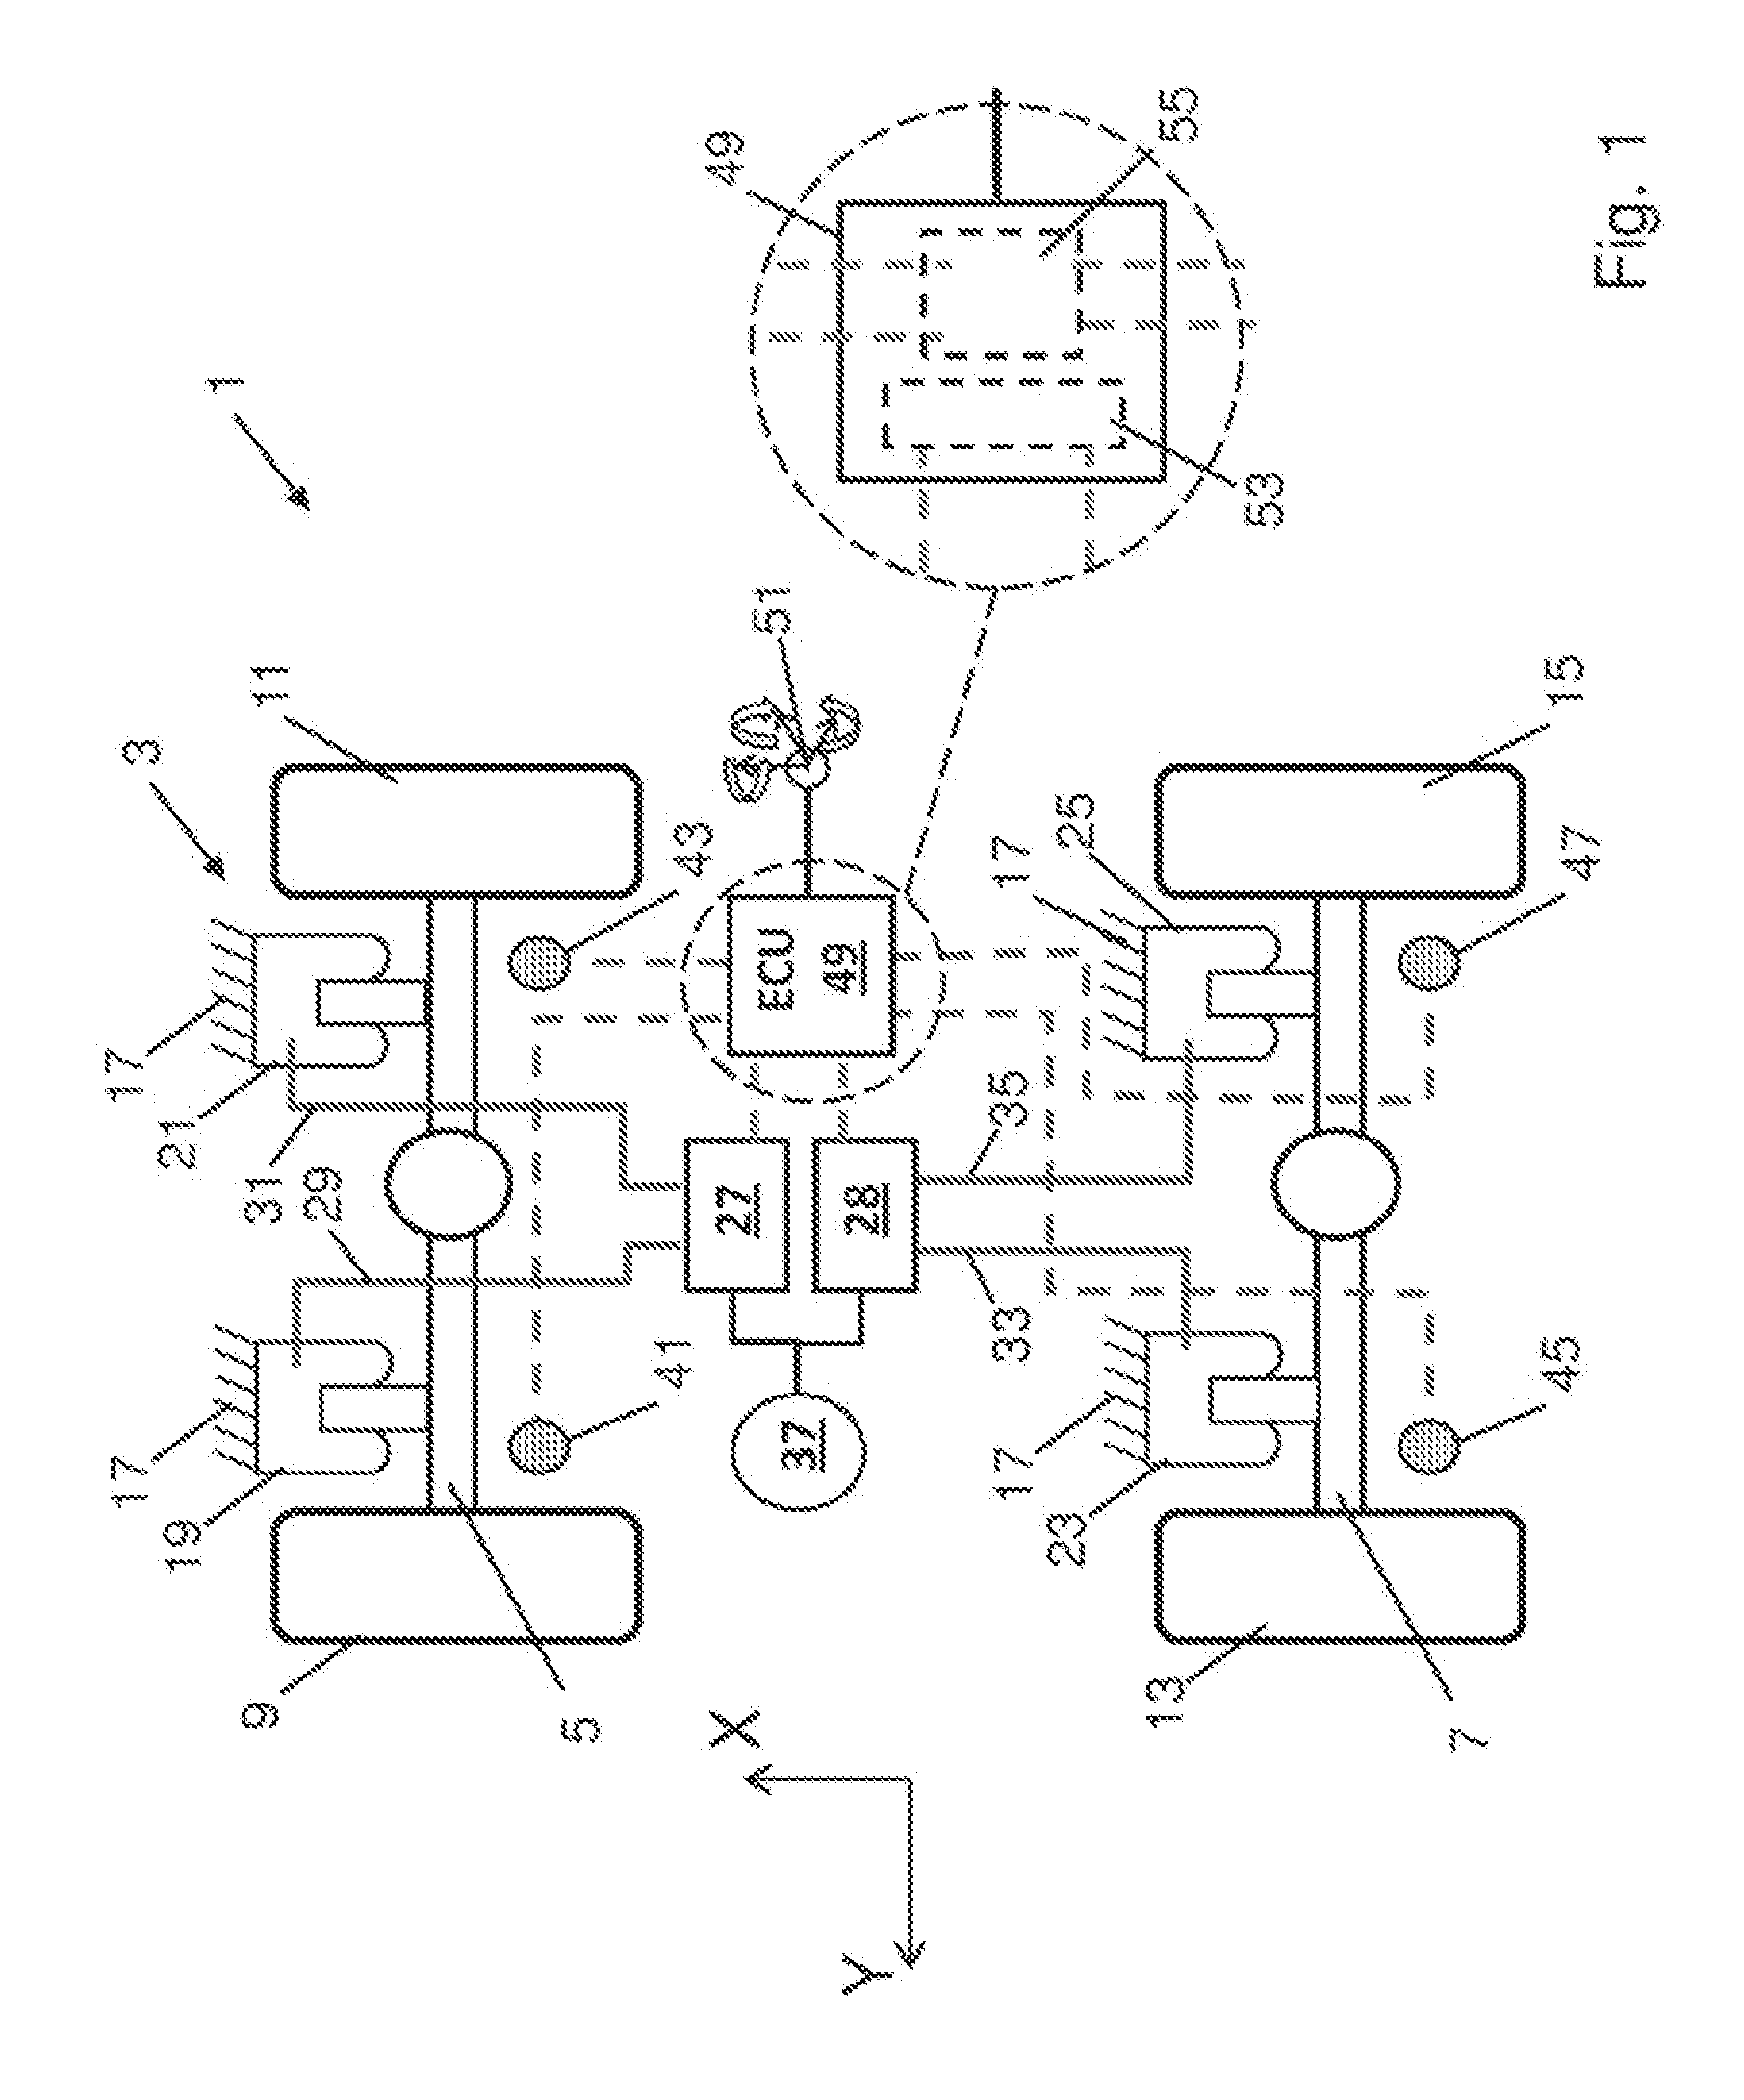 Control system for a vehicle suspension